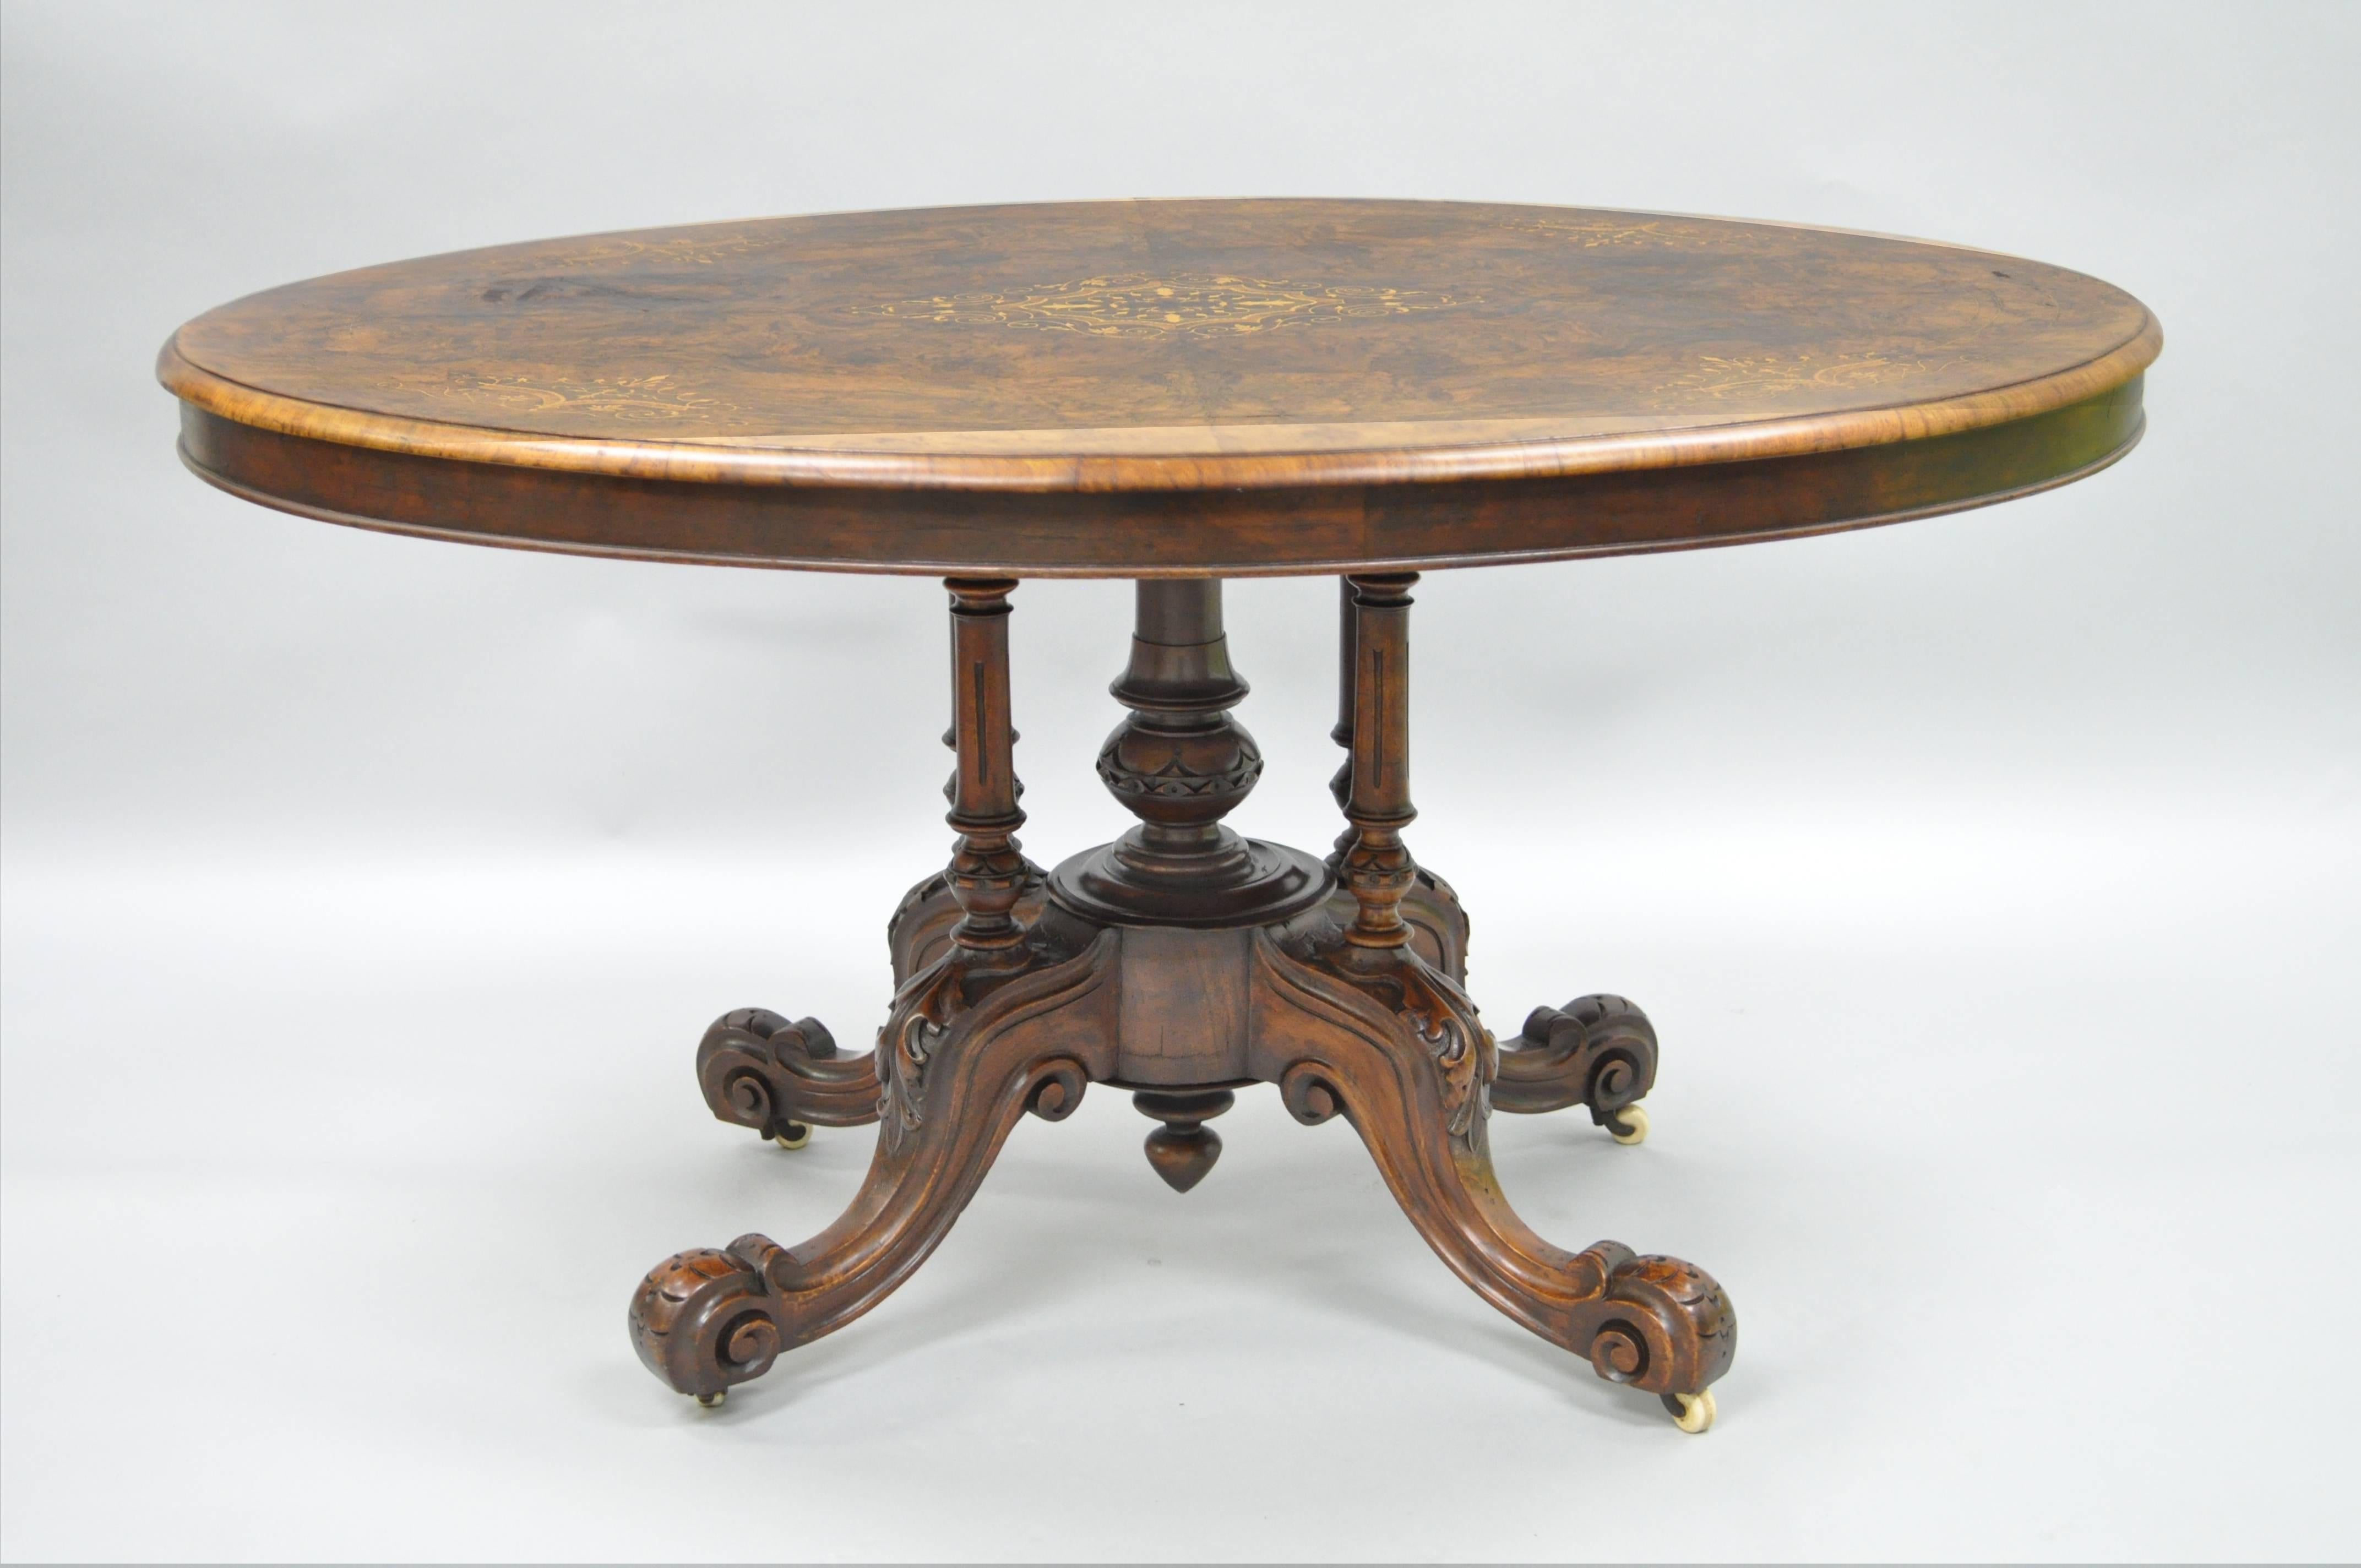 High Victorian 19th Century Victorian Carved Burl Walnut Tilt-Top Marquetry Inlay Center Table